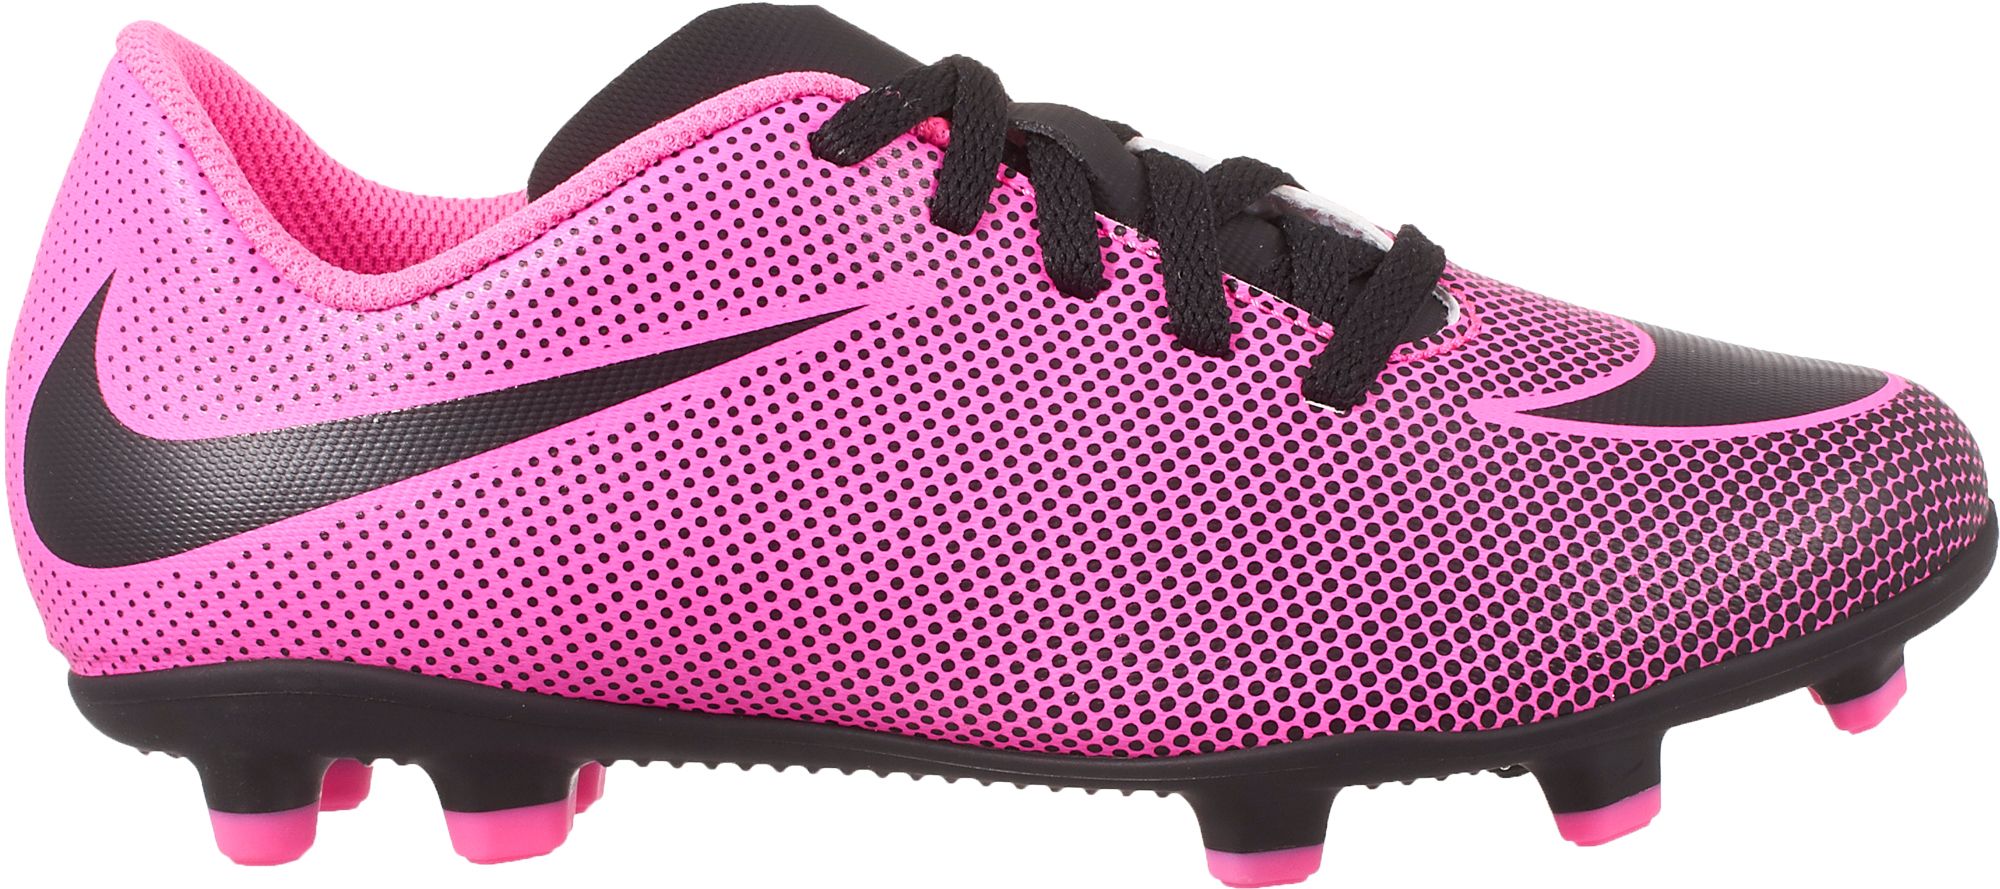 nike soccer cleats toddler